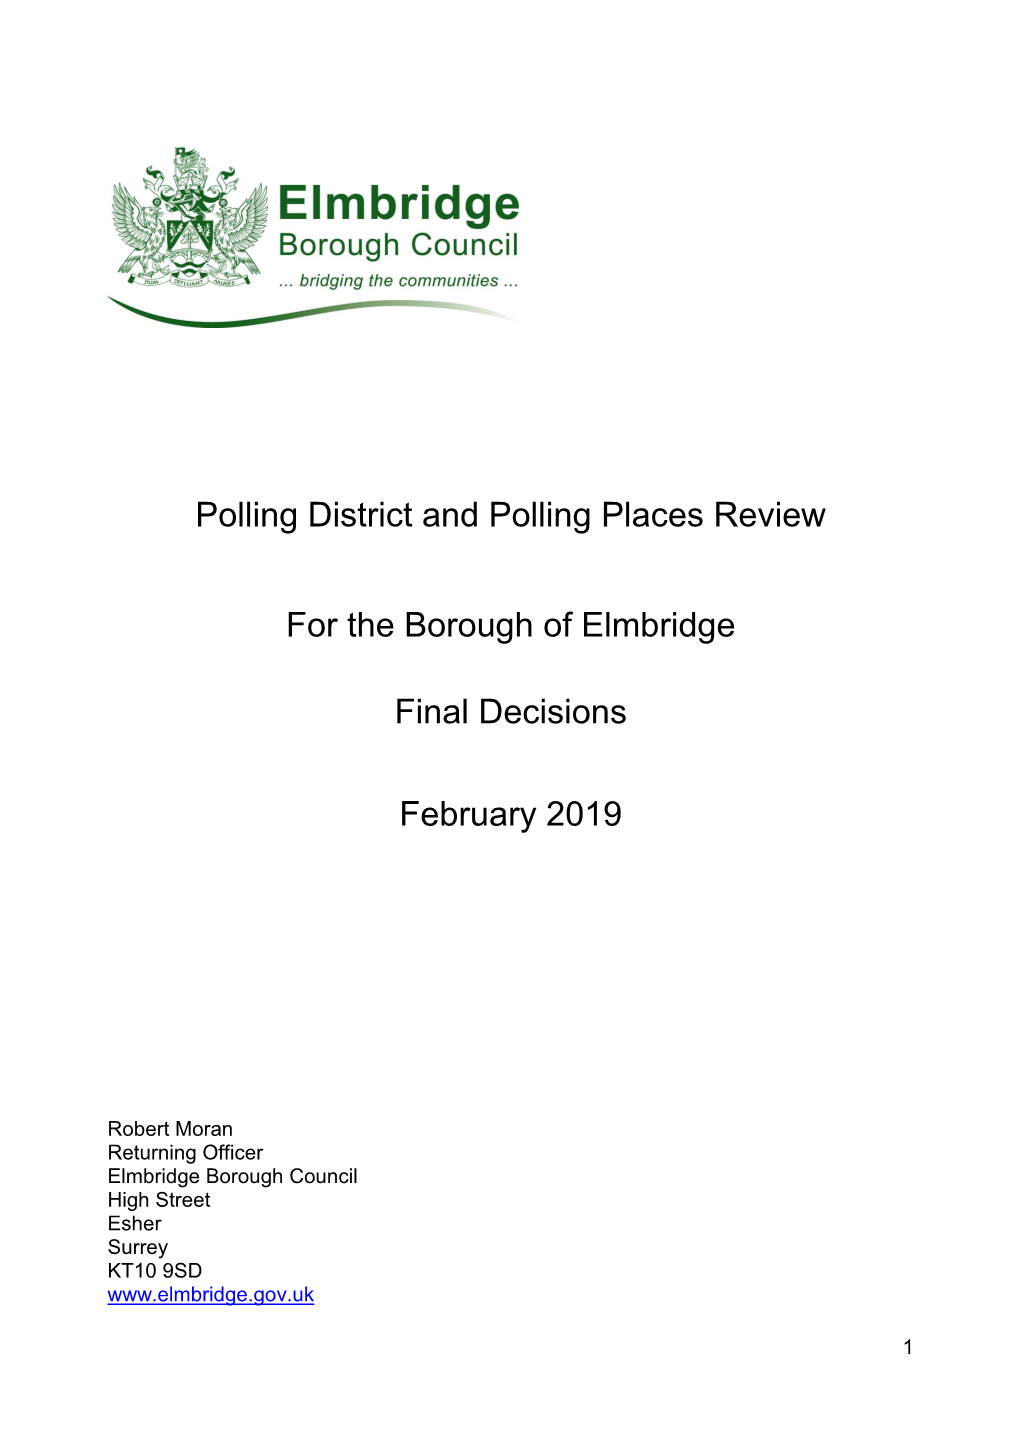 Results of the Polling District and Polling Place Review 2018